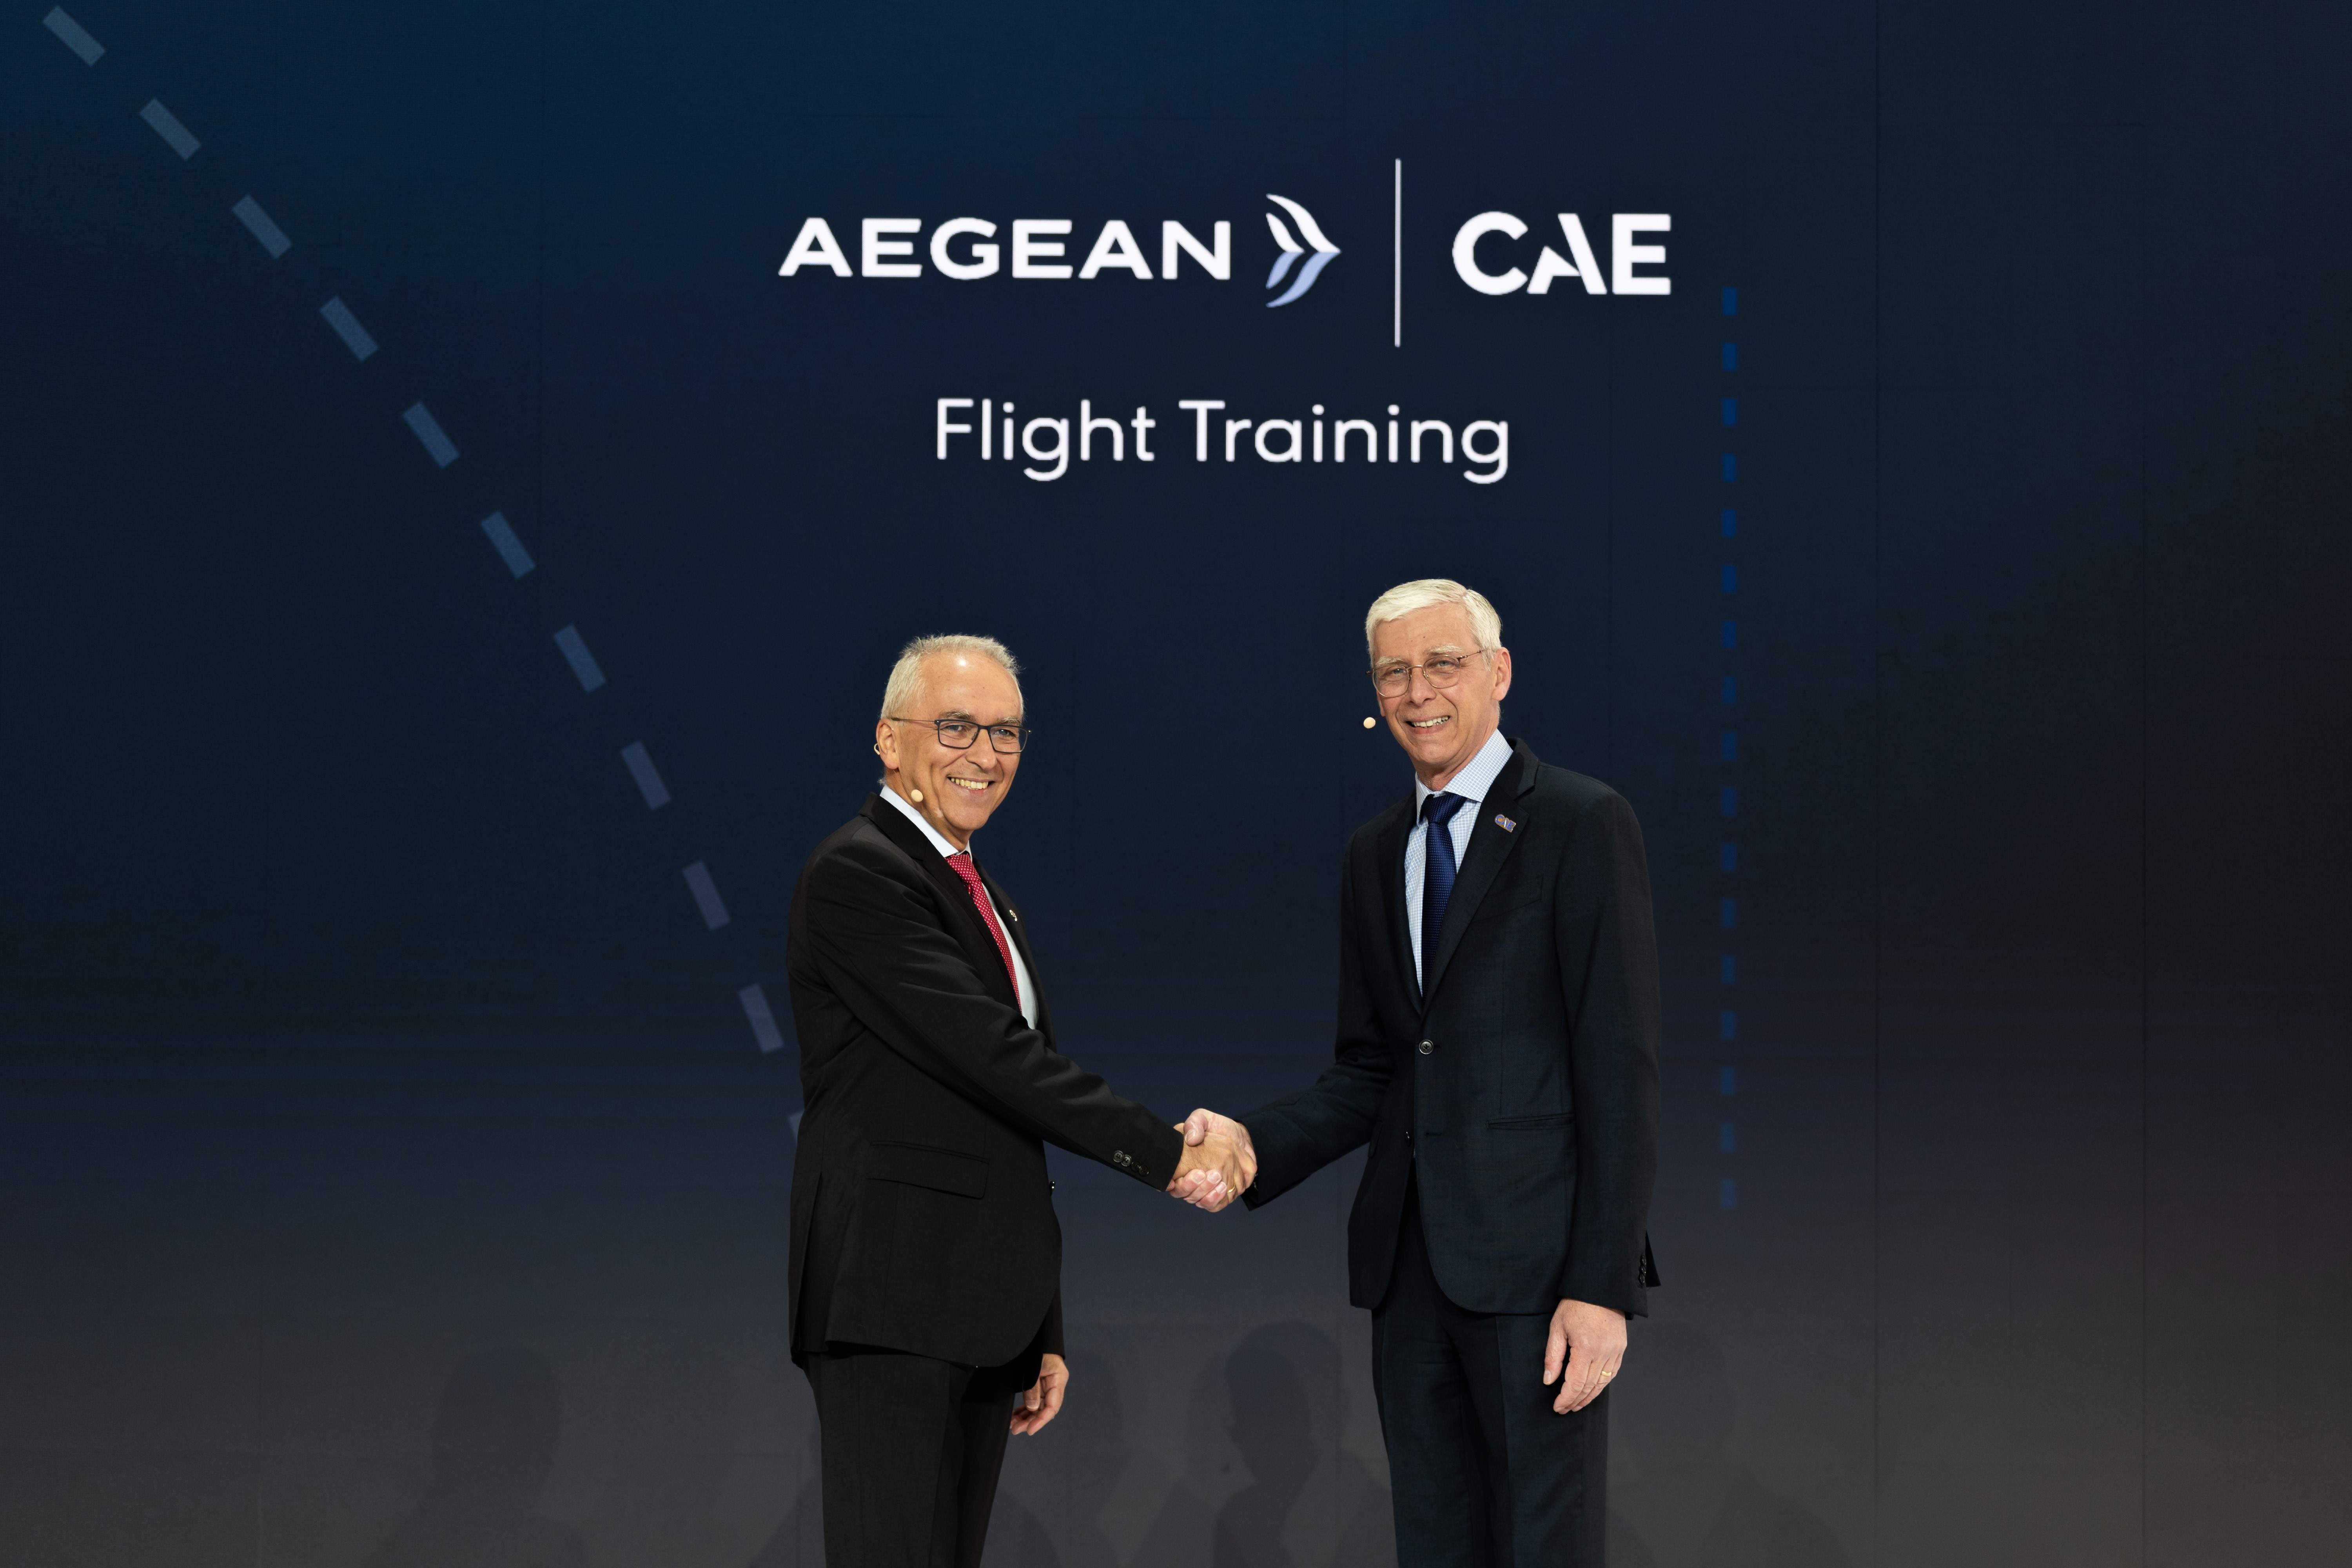 AEGEAN and CAE partner to create Greece’s first Advanced Flight Training Center